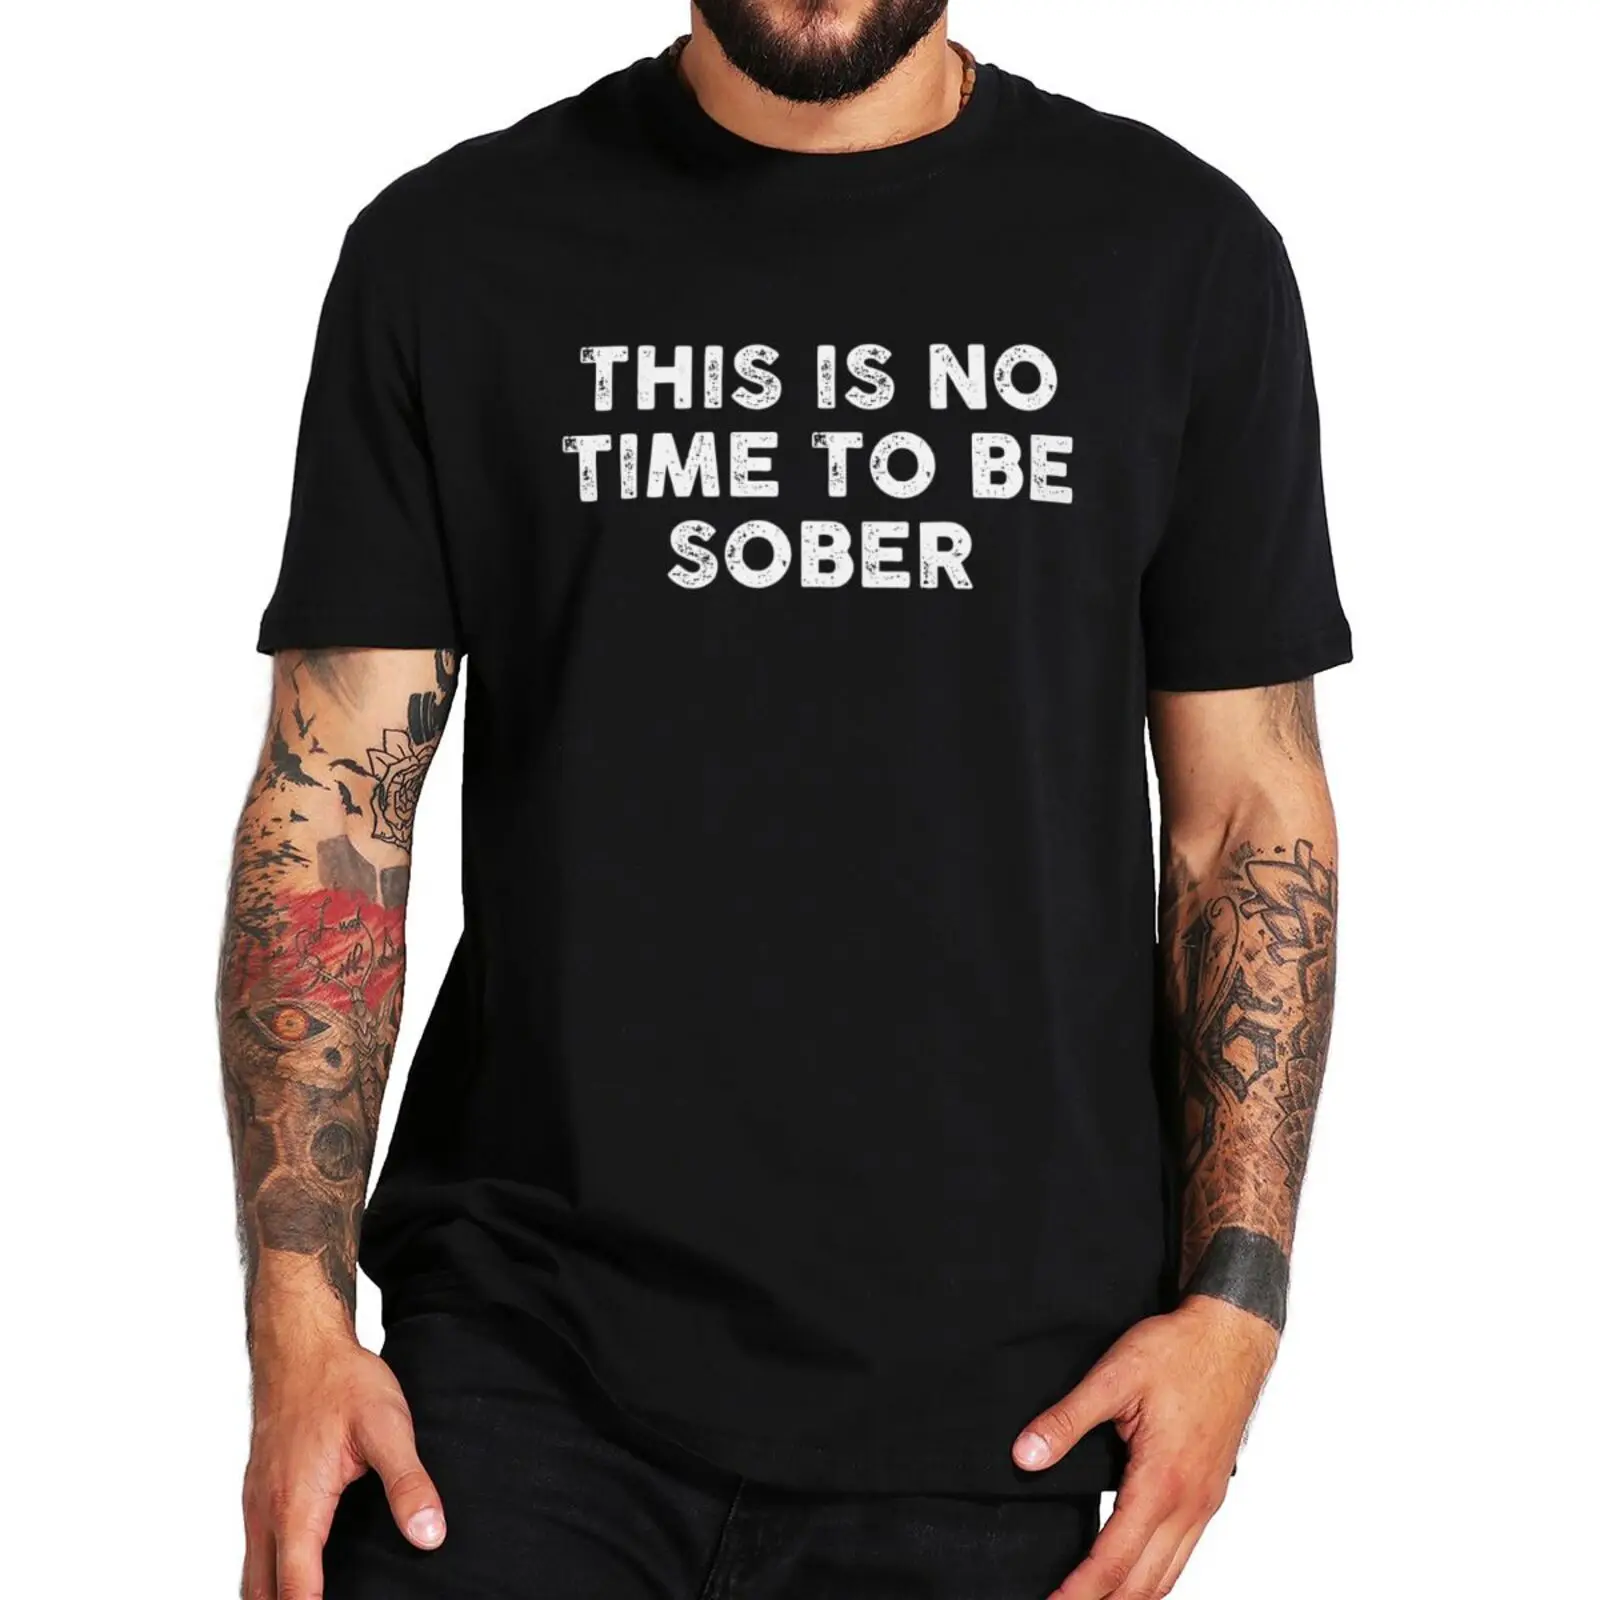 This Is No Time To Be Sober T-Shirt Funny Drinking Drink Beer Lovers Tshirt Casual Premium 100% Cotton Soft T Shirt EU Size